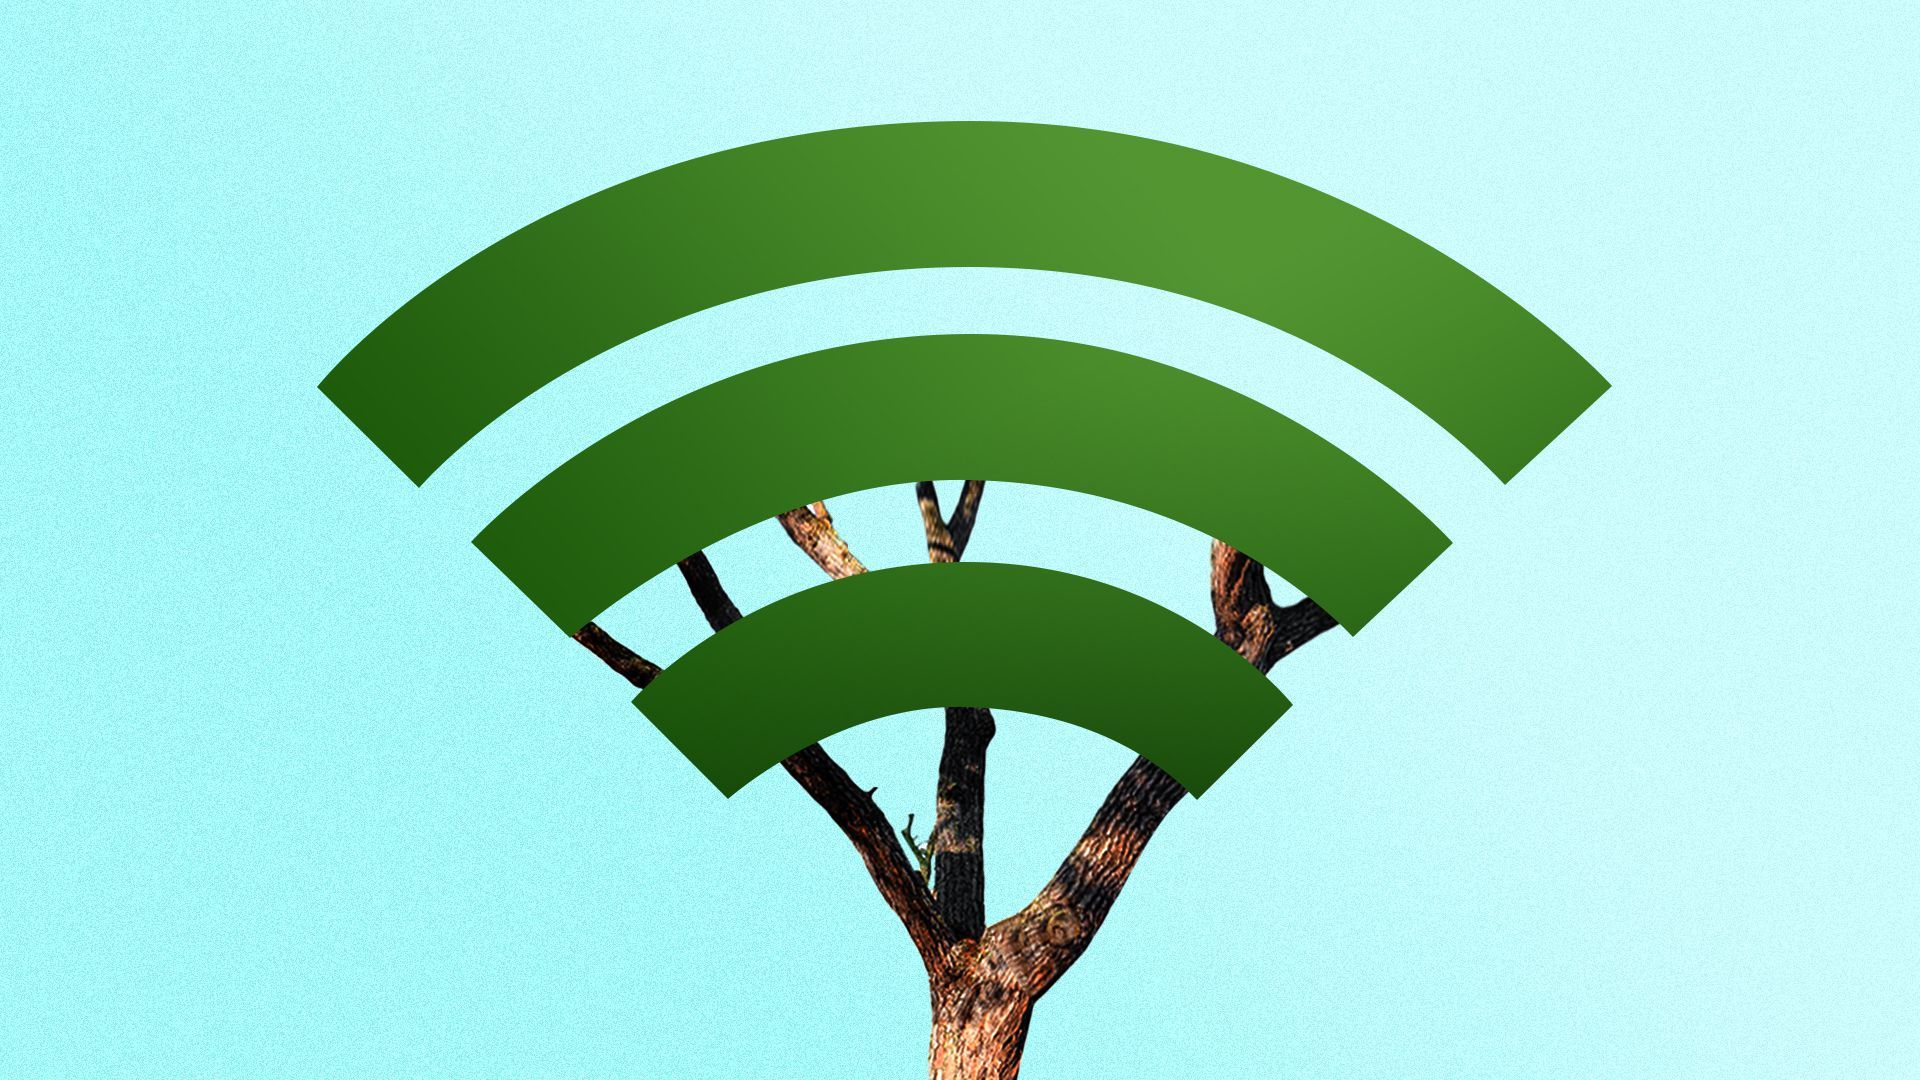 Illustration of a tree trunk with a Wifi symbol in place of leaves